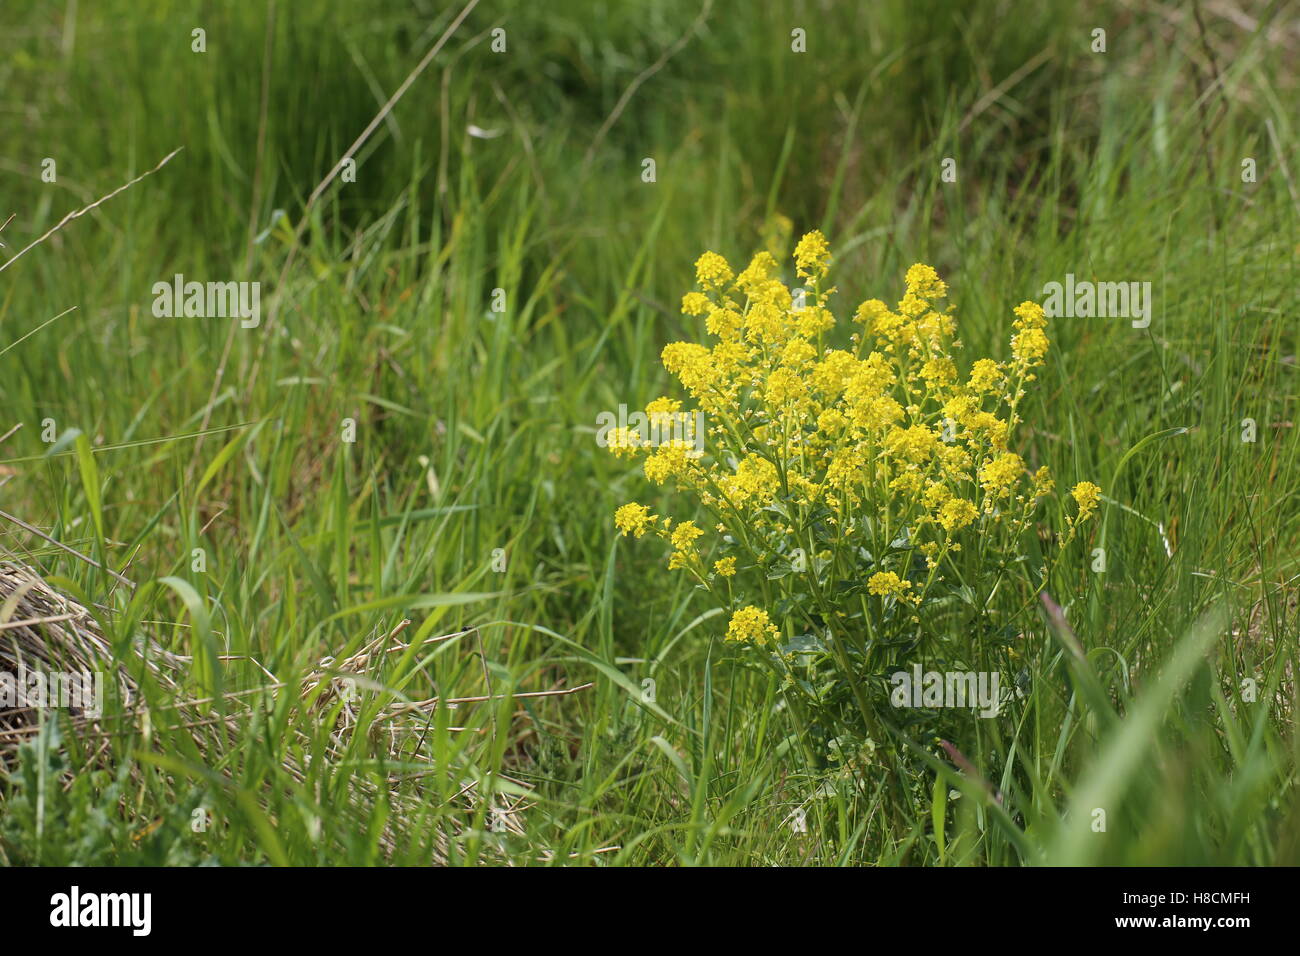 Barbarea vulgaris, a plant commonly called herb barbara. Stock Photo